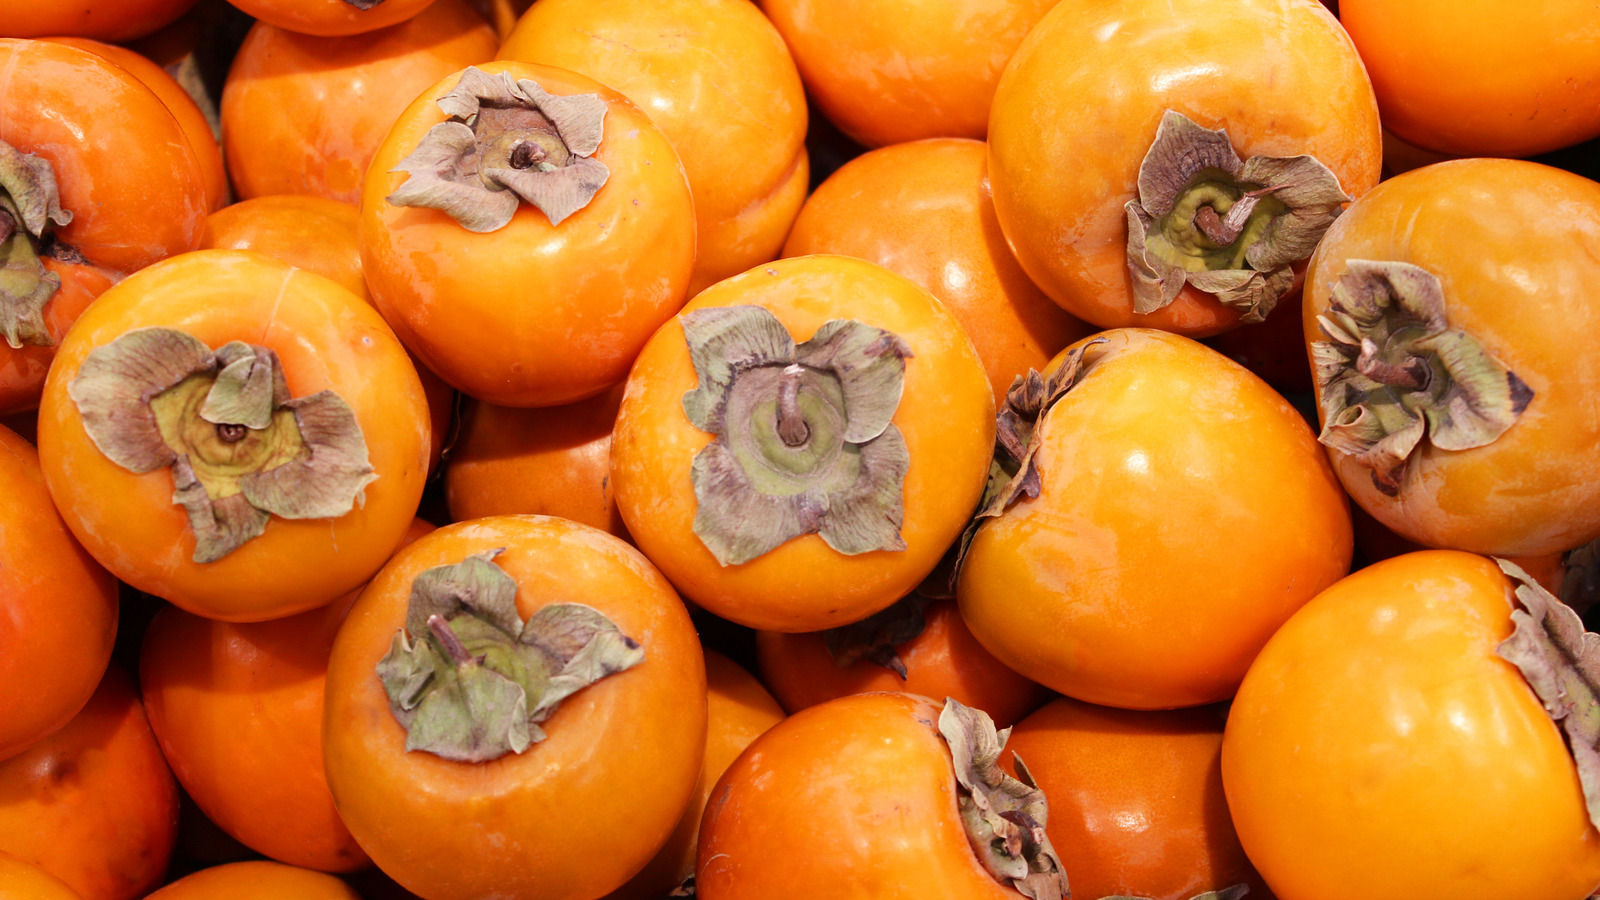 What Are The Benefits Of Eating Persimmons?